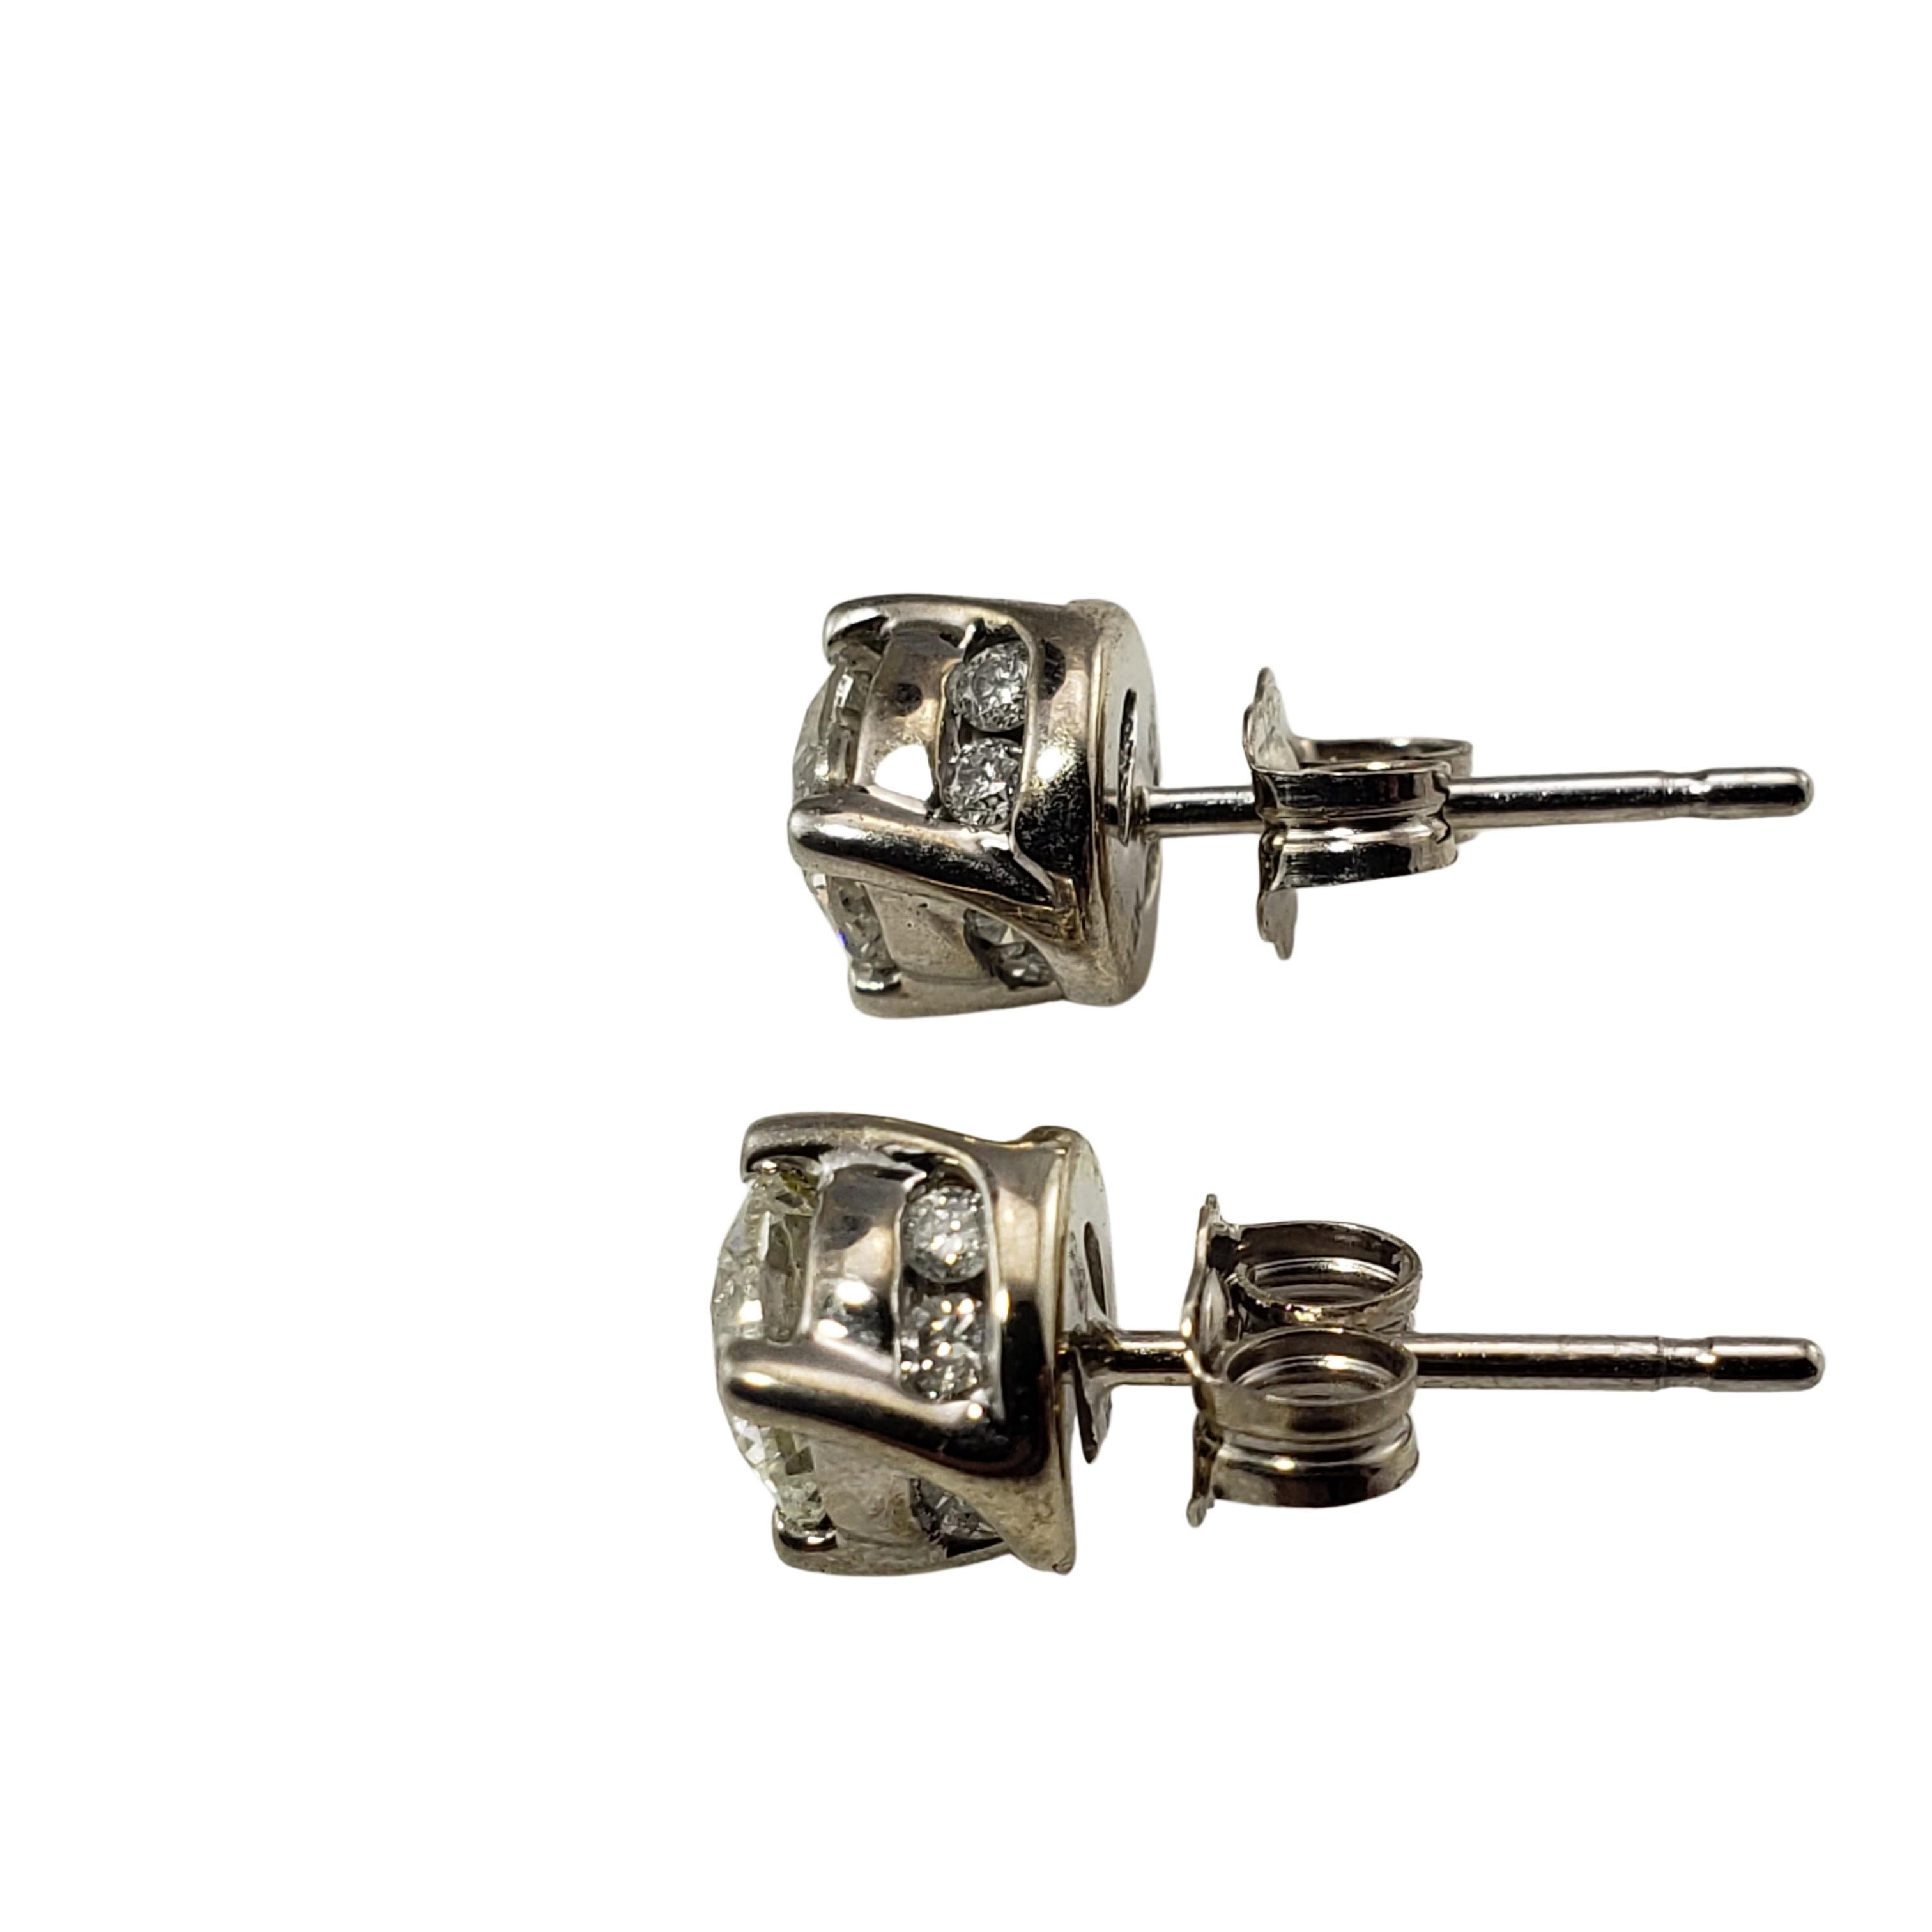 Vintage 14 Karat White Gold Diamond Stud Earrings .94 TCW.-

These sparkling earrings each feature one center round brilliant cut diamond in a diamond encrusted setting .  Push back closures.

Approximate total diamond weight:  .94 ct.  (.78 TCW.